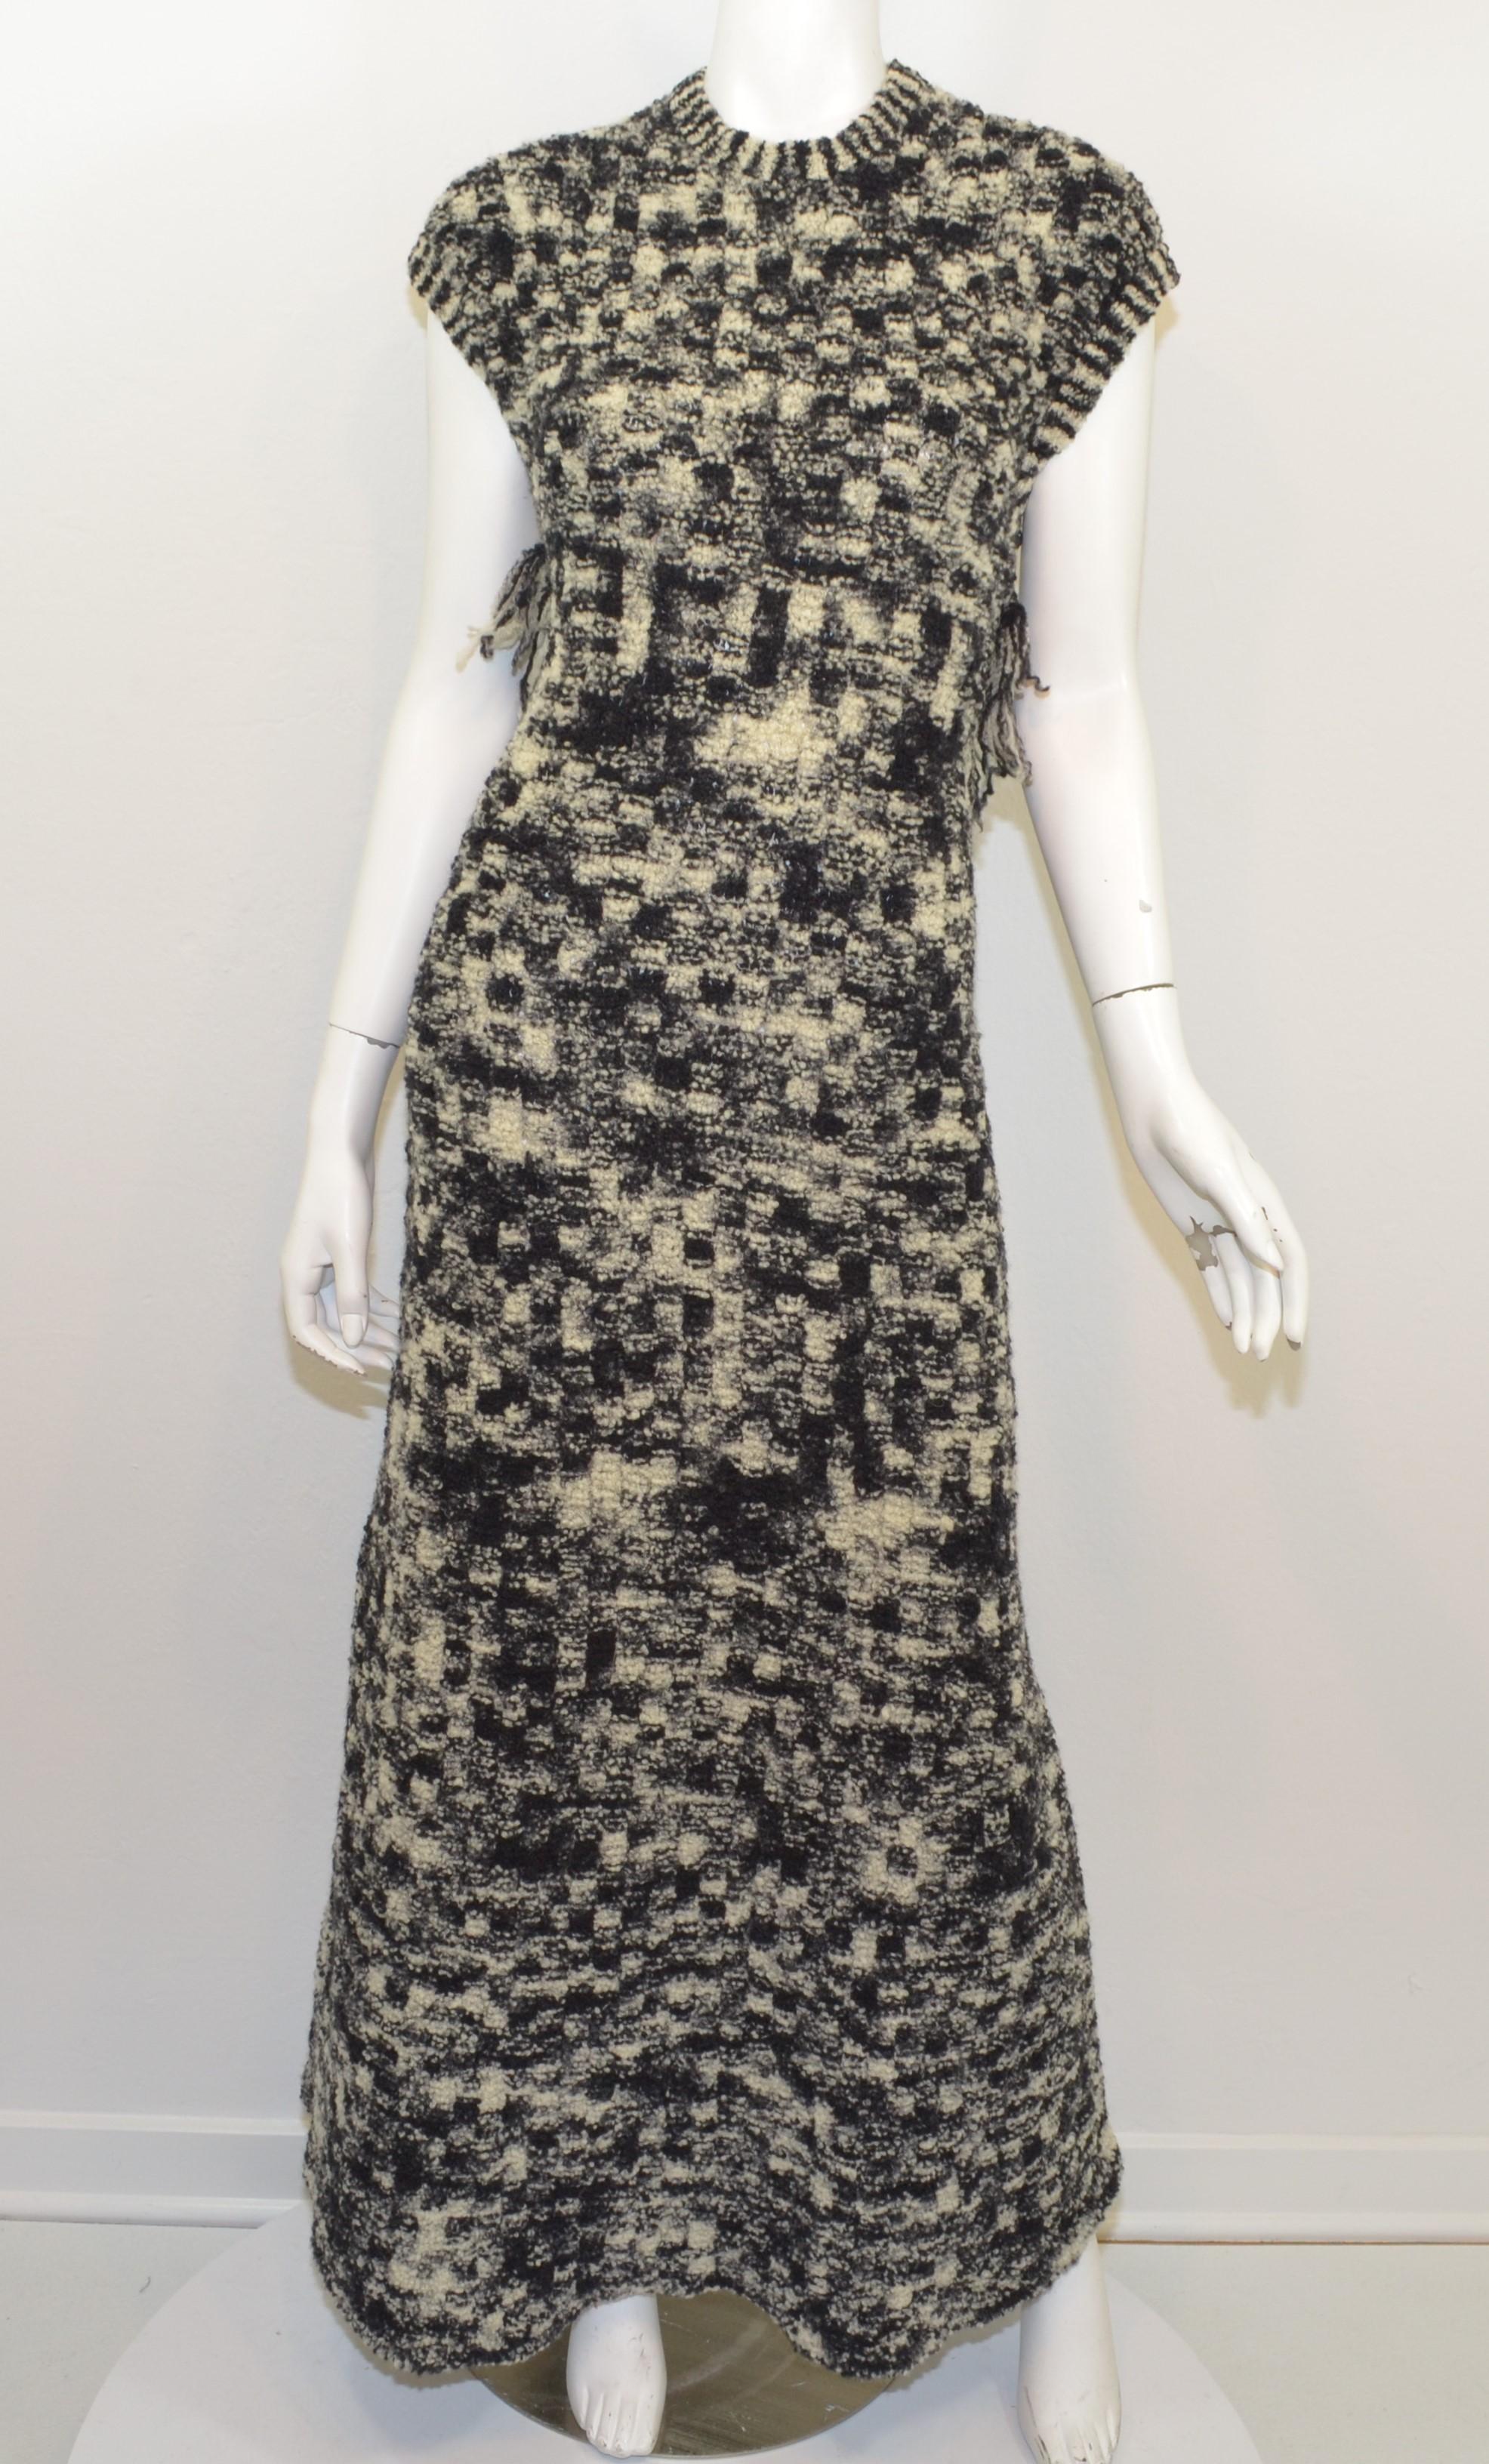 Chanel gown 2011 Fall/Winter Apocalyptic Collection -- featured in a black and cream boucle knit design with an X-crossover strap across the back with a single black Strass crystal encrusted button. Dress is composed with 90% wool / 10% nylon and is